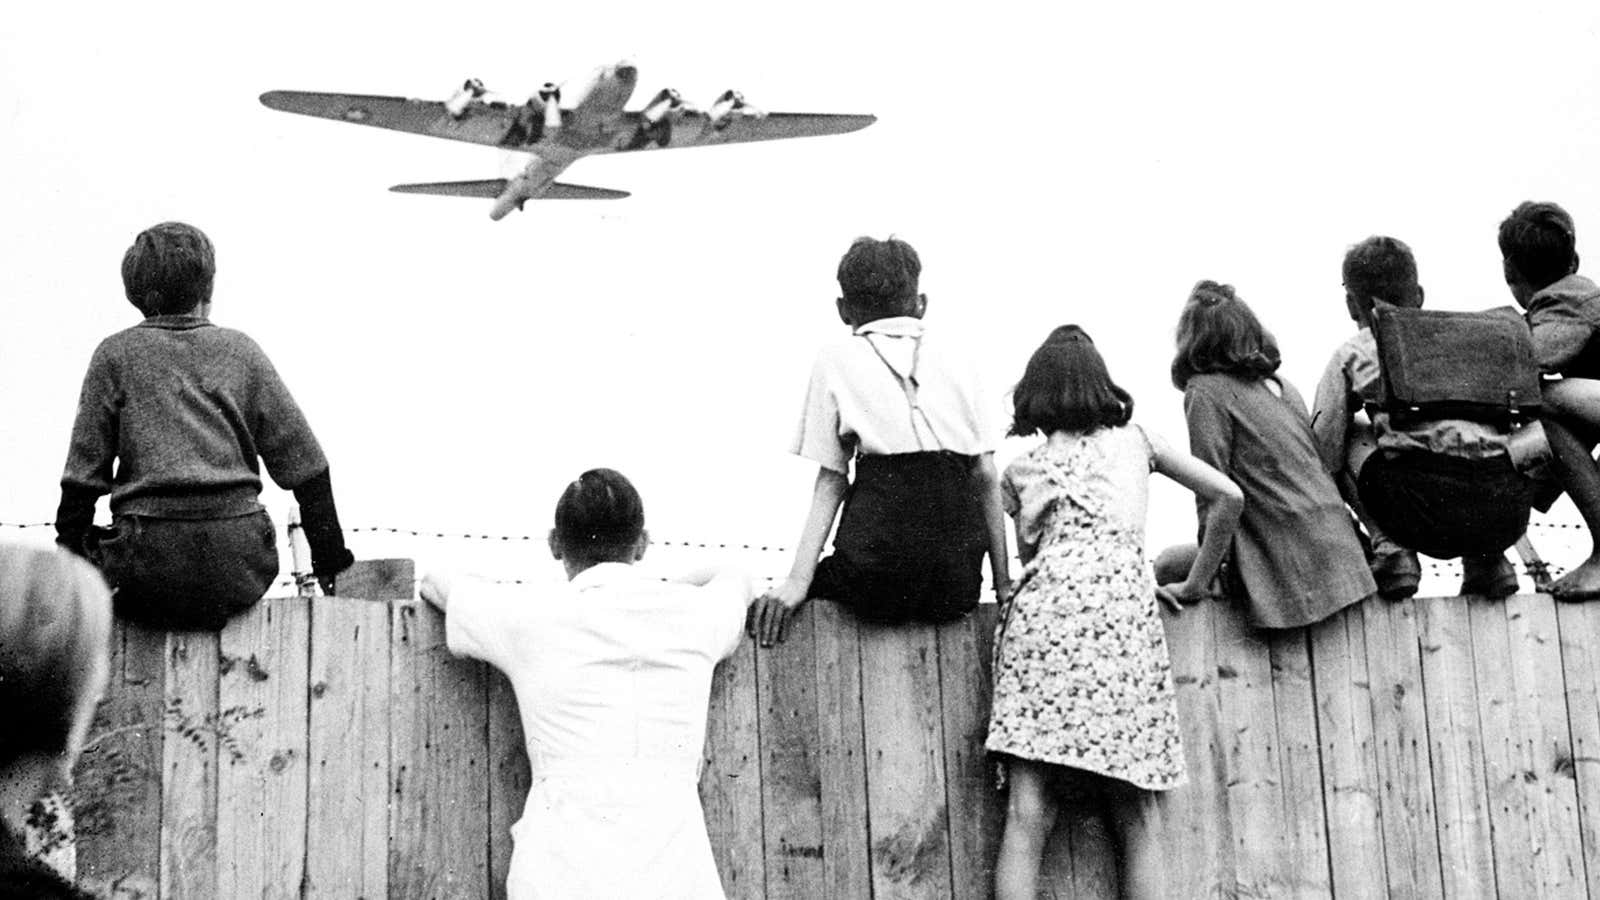 West German kids wait for the US planes to drop candies.